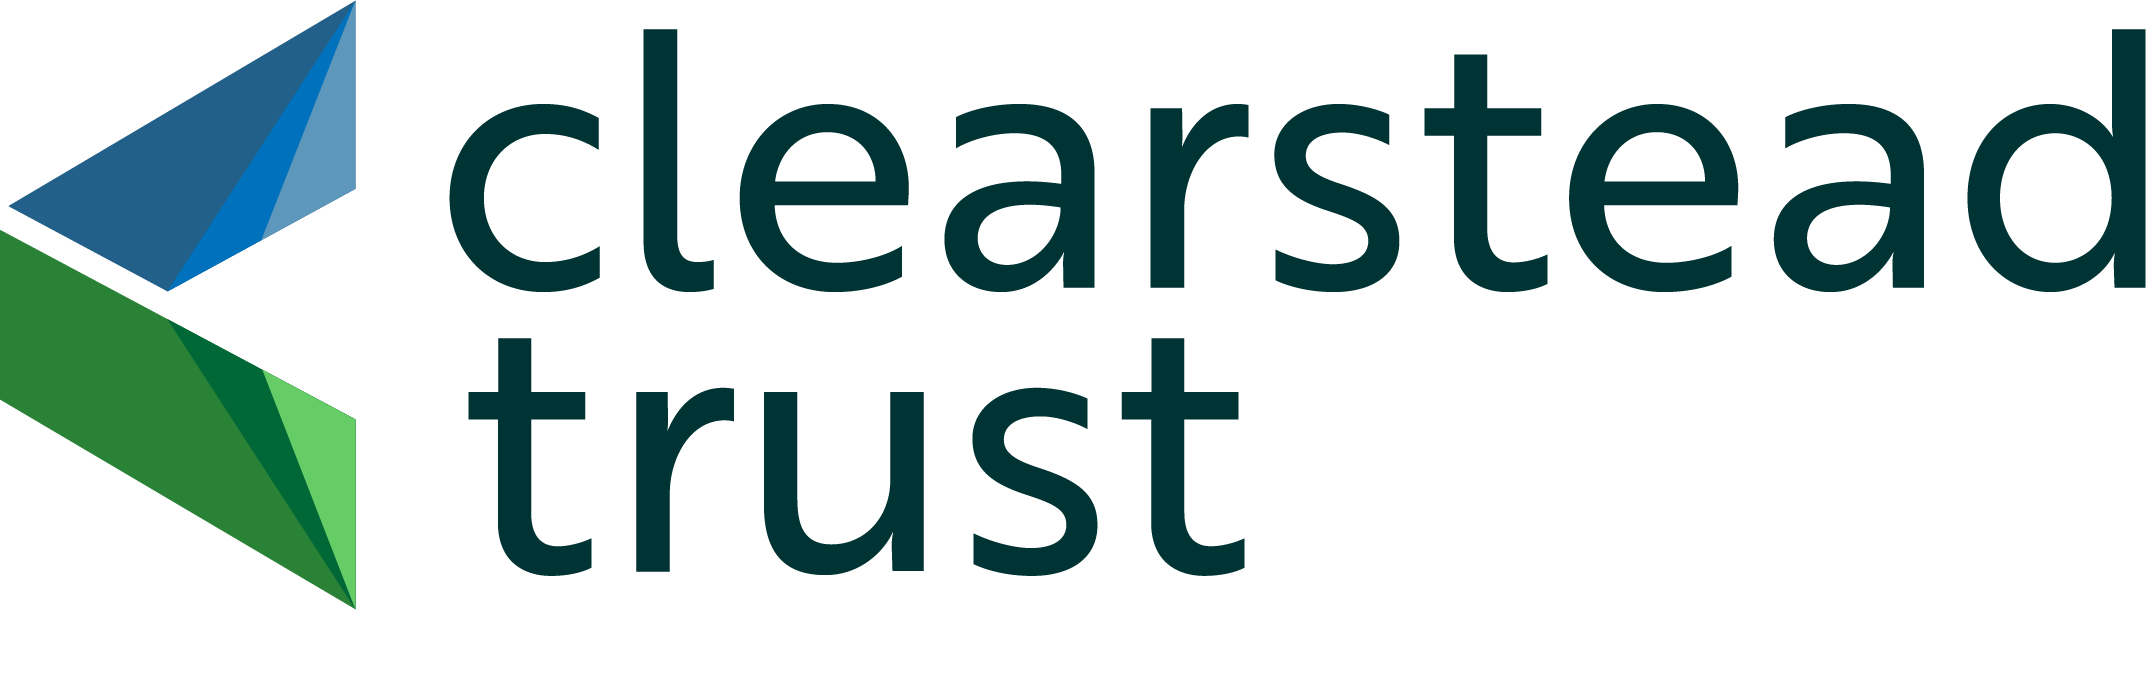 Clearstead Trust